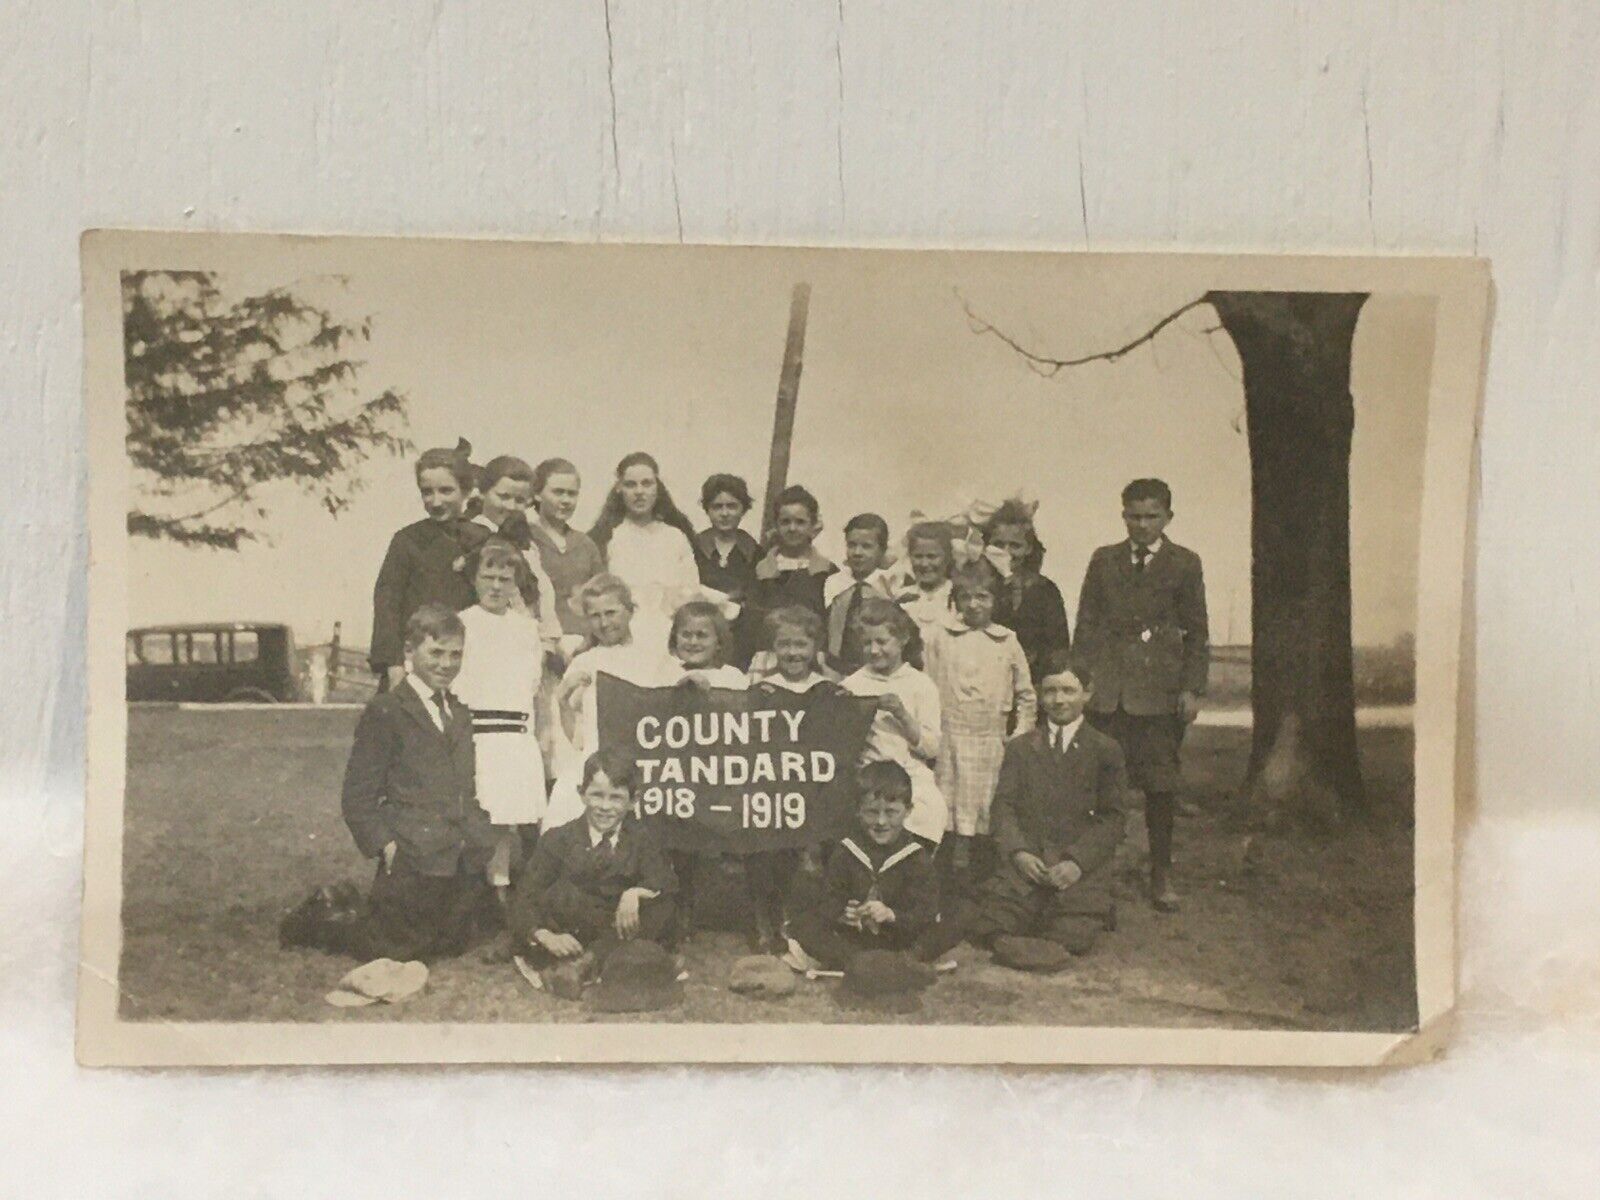 Vintage 1918-1919 County Standard School Photograph - Awesome Estate Find